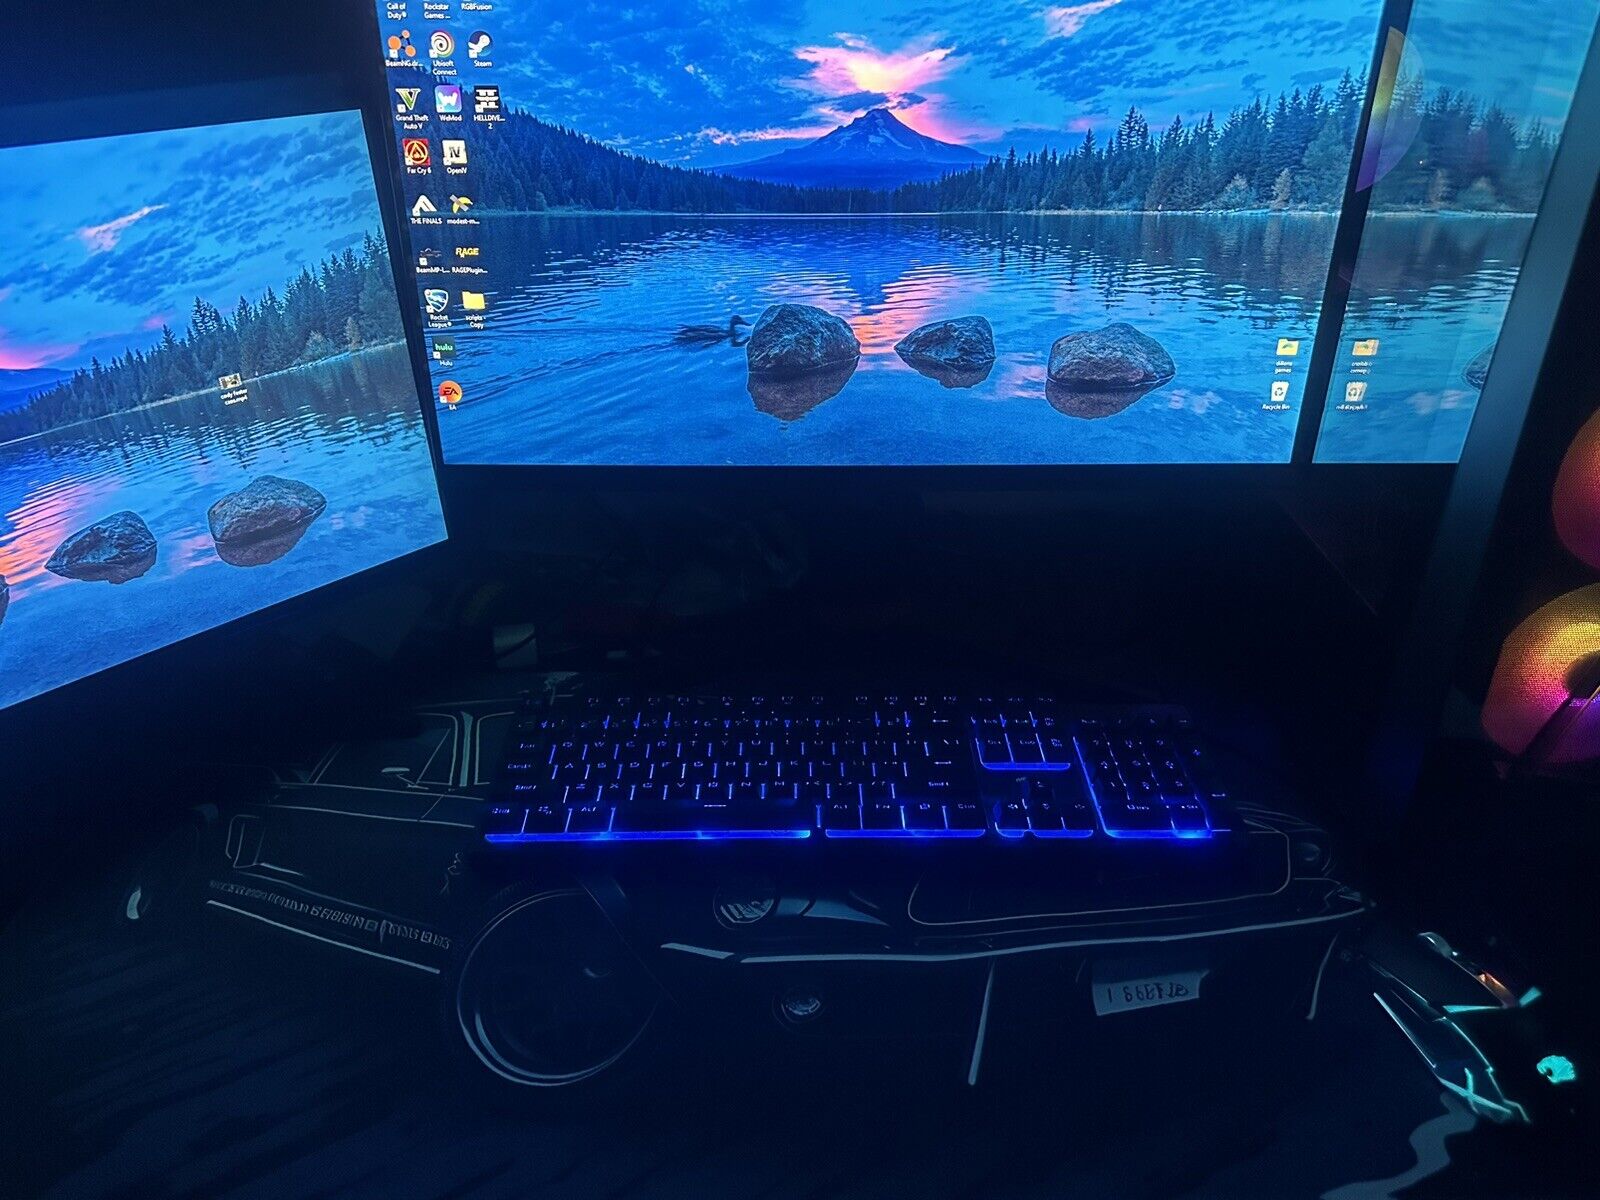 IBuypower Gaming Pc. Comes With Two Monitors One 144H Other 60, Mouse,Keyboard.